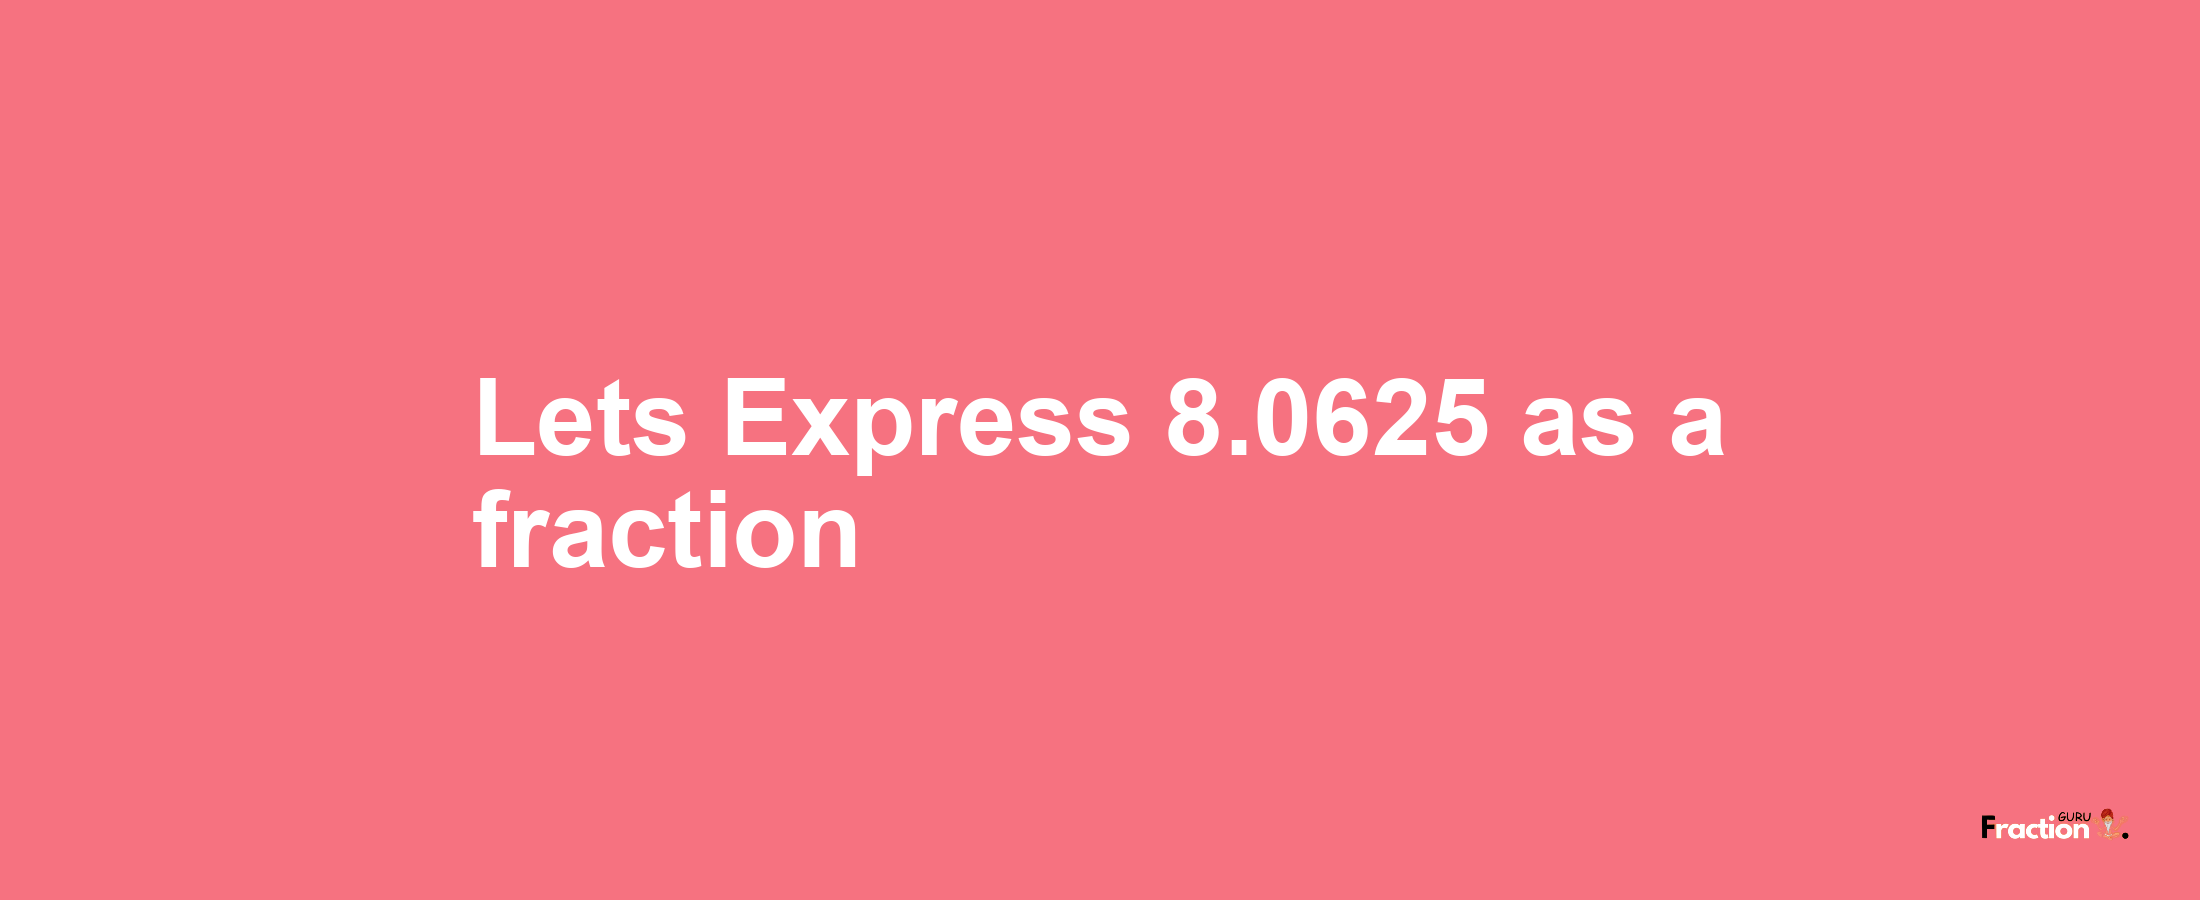 Lets Express 8.0625 as afraction